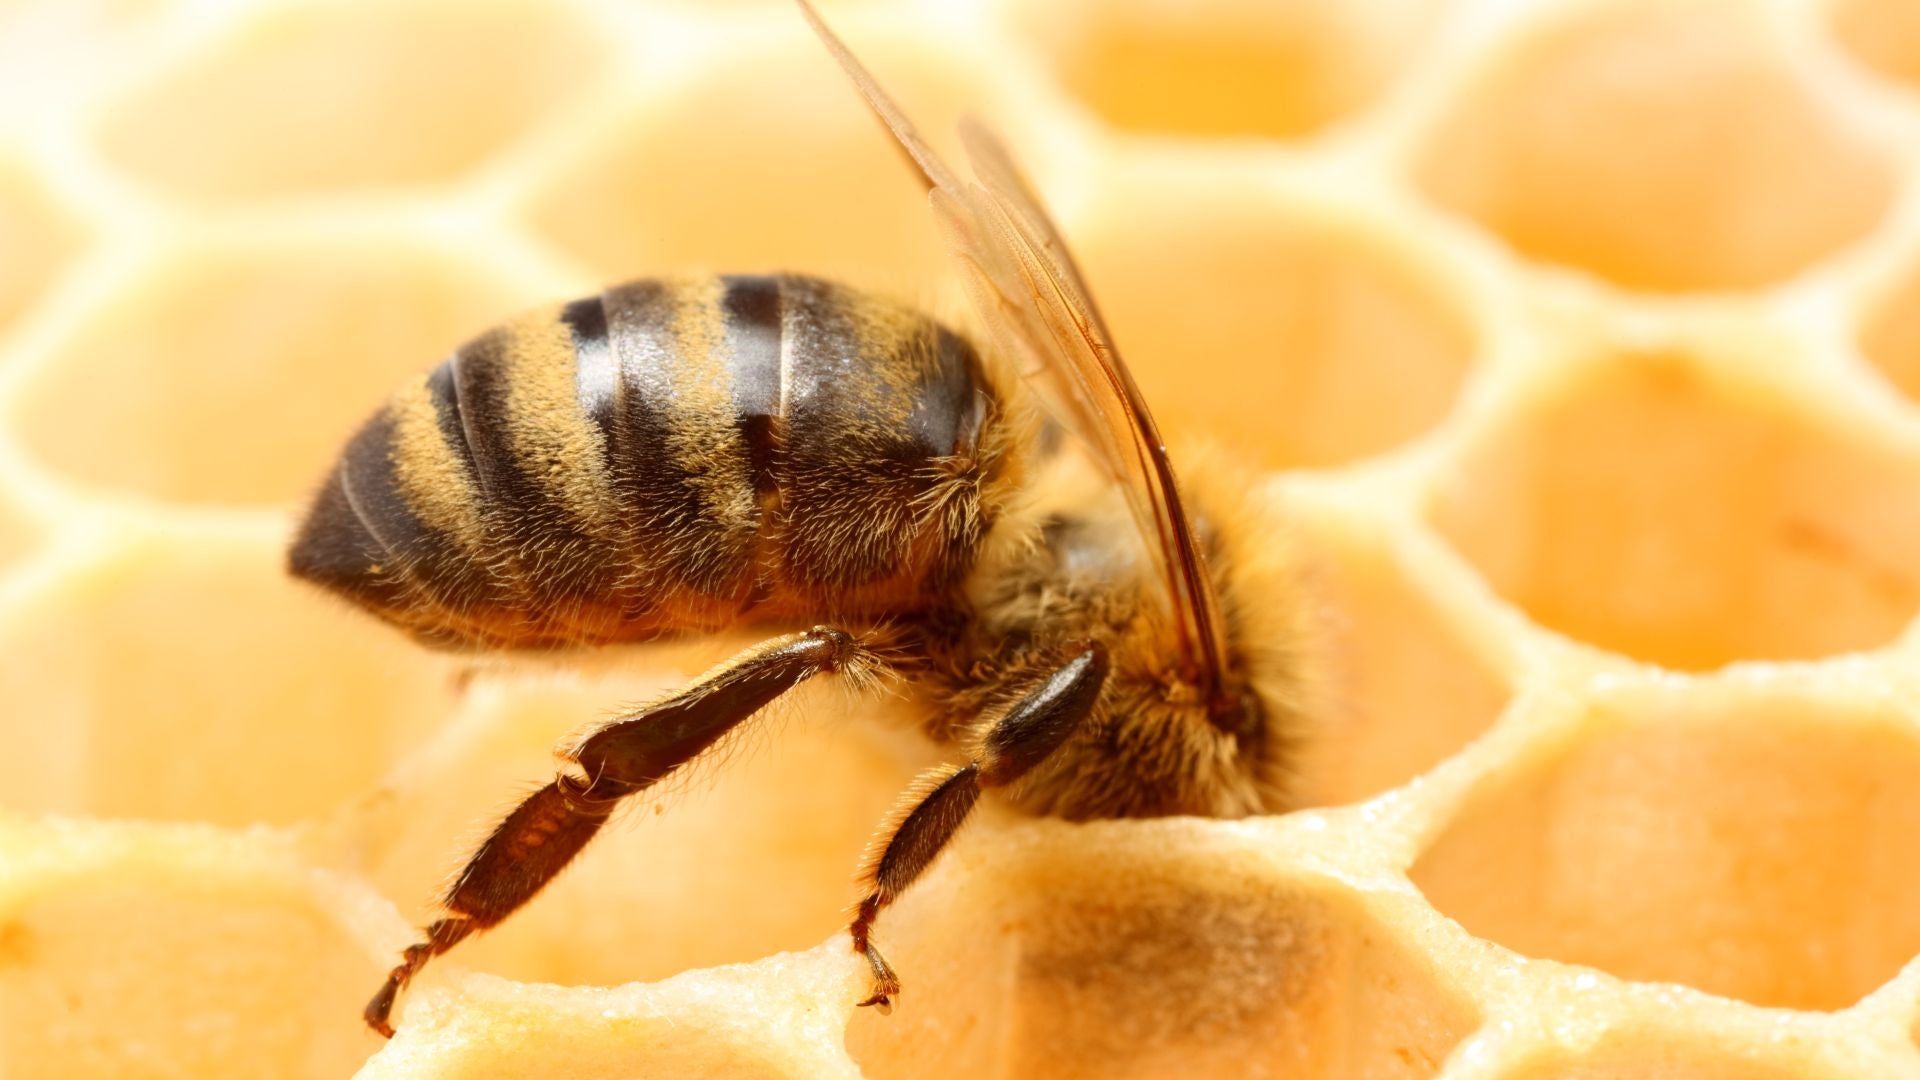 The Versatile and Sustainable Benefits of Beeswax: From Honeycomb to Hockey Sticks